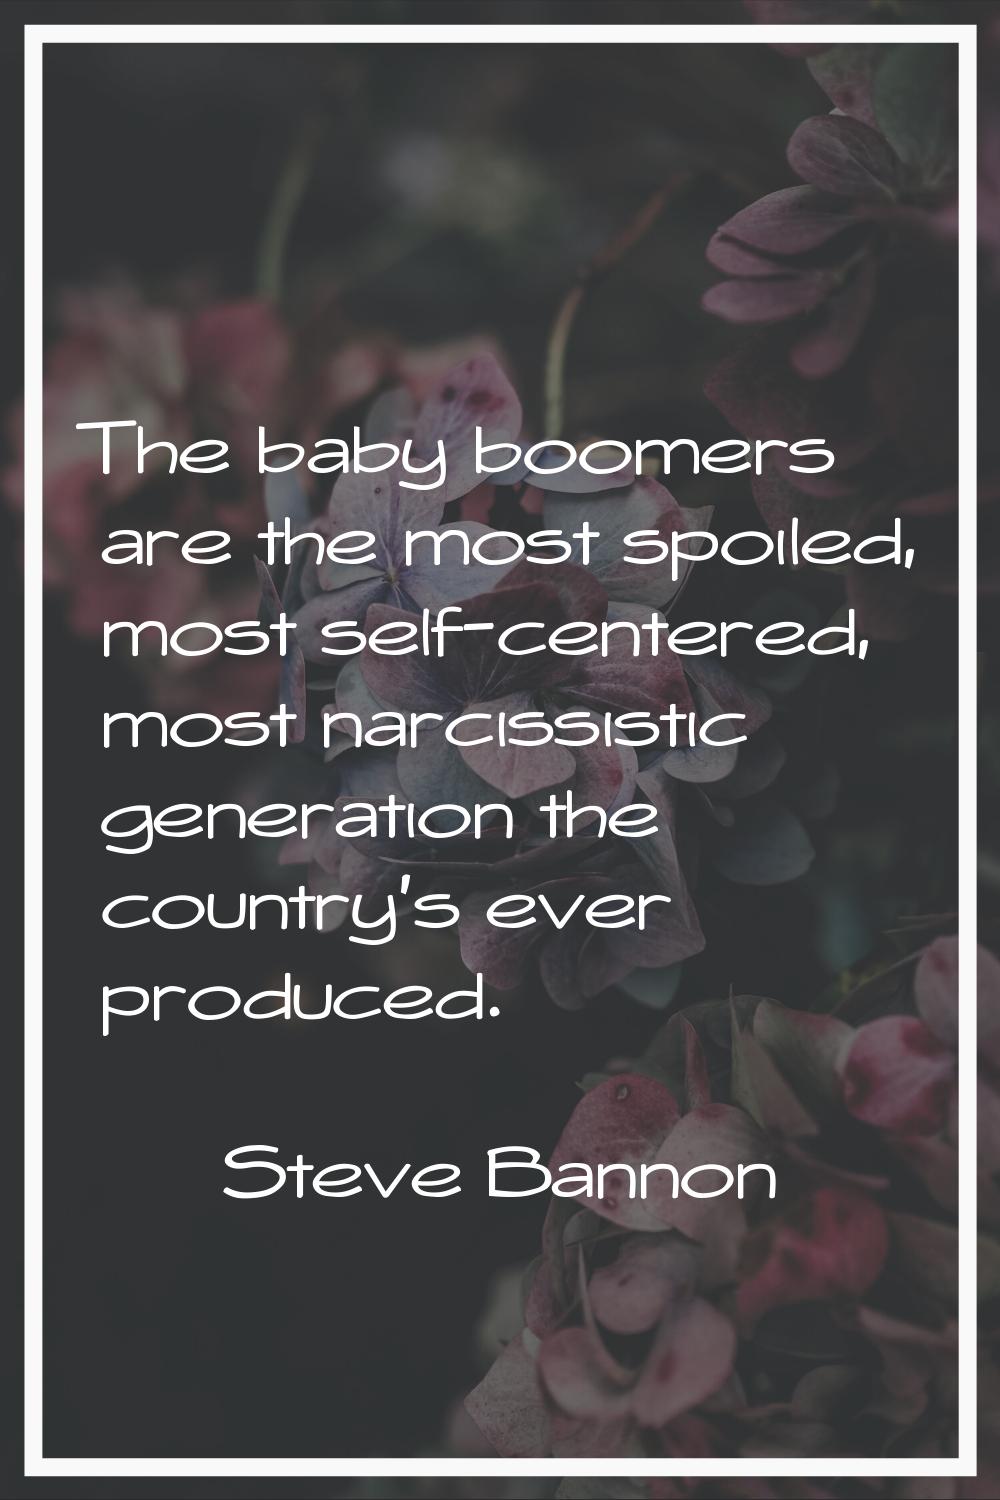 The baby boomers are the most spoiled, most self-centered, most narcissistic generation the country